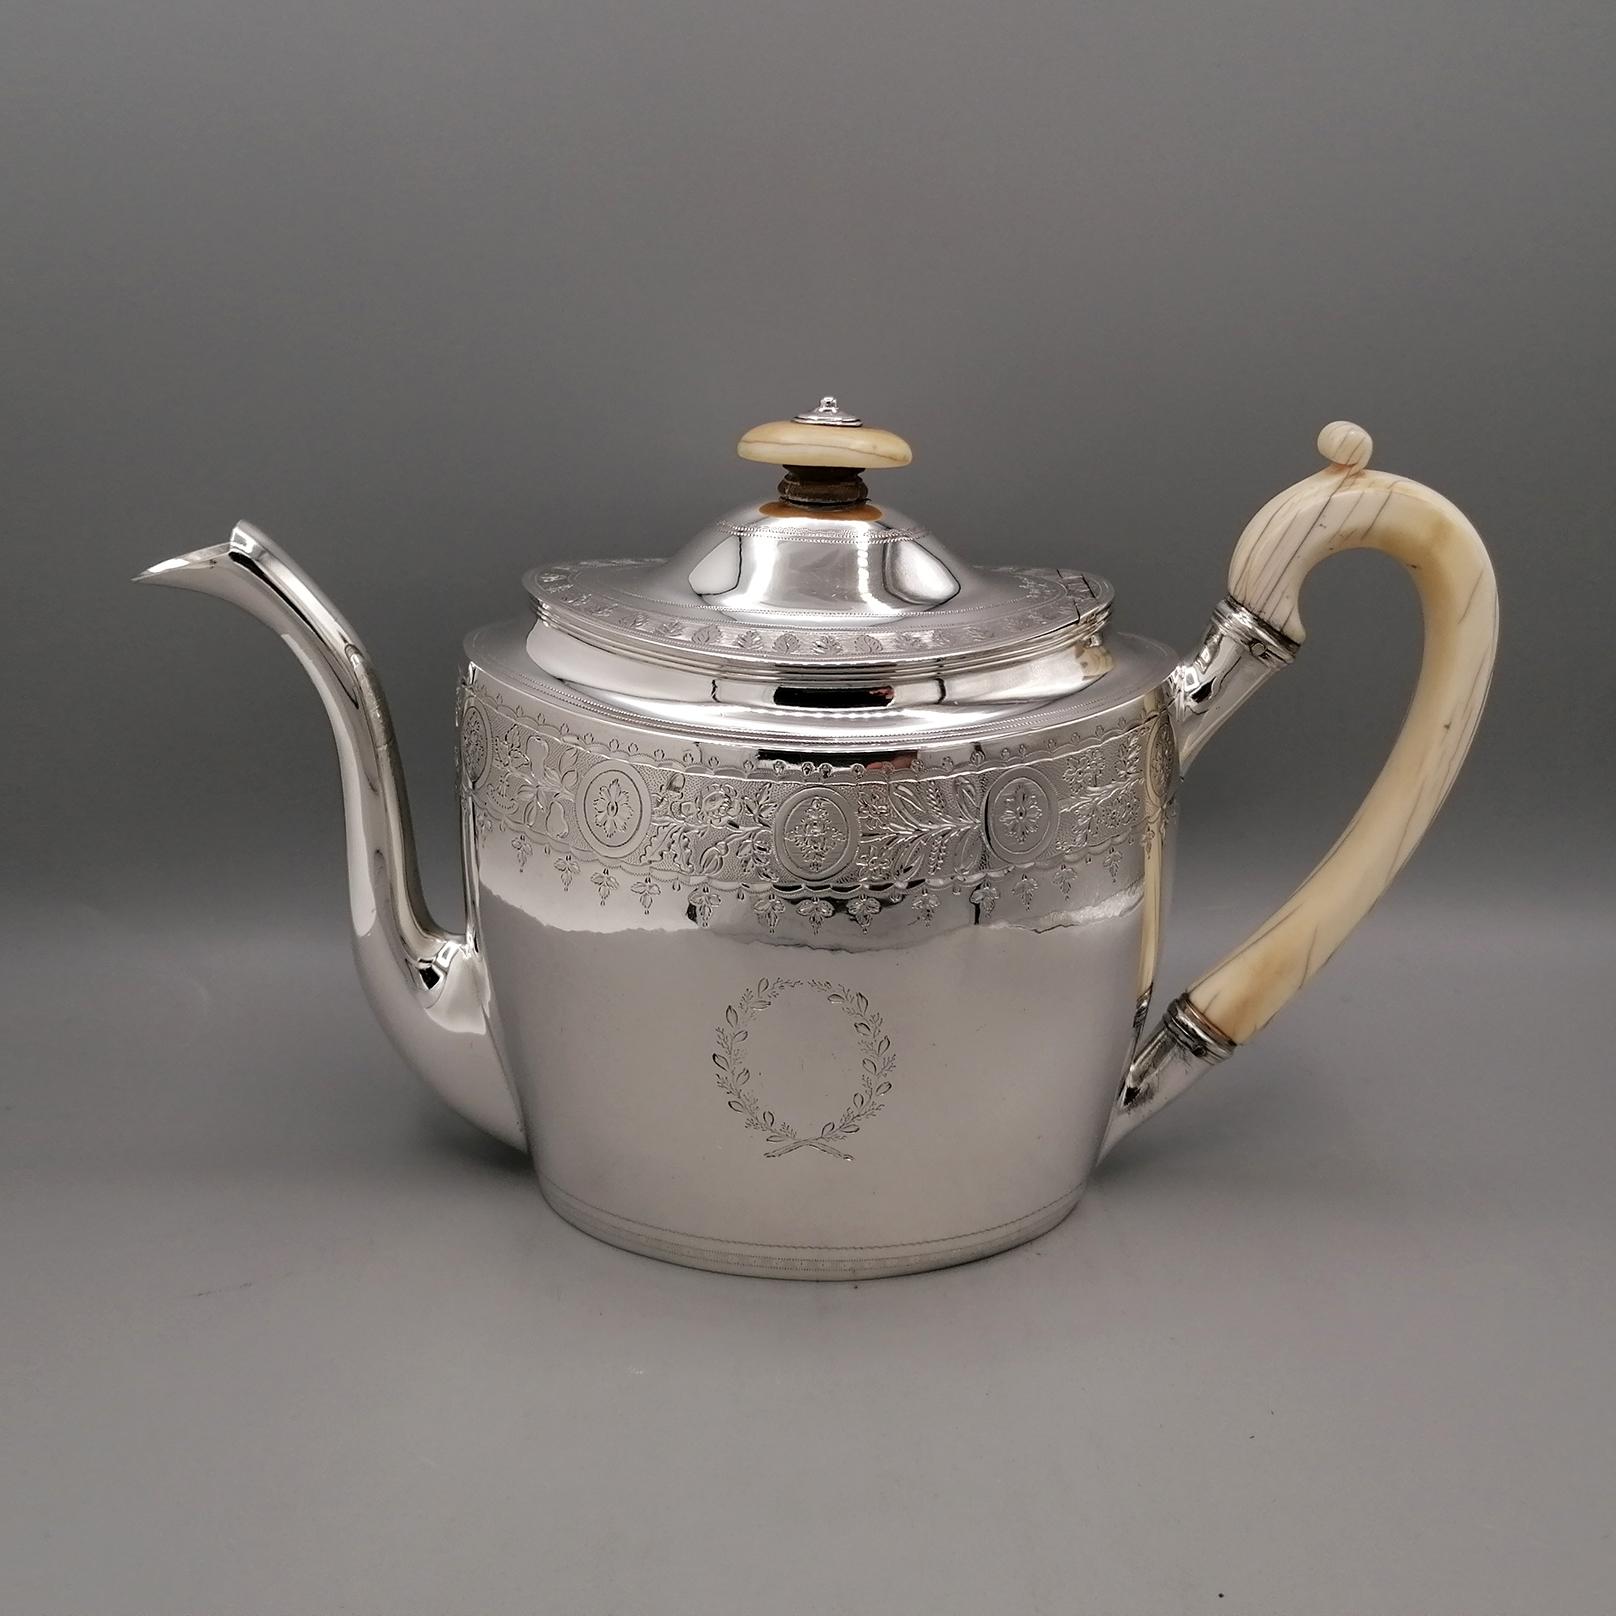 Antique George III Sterling Silver Tea-Coffeeset ivory Handles & Tray 1798-1800 For Sale 4